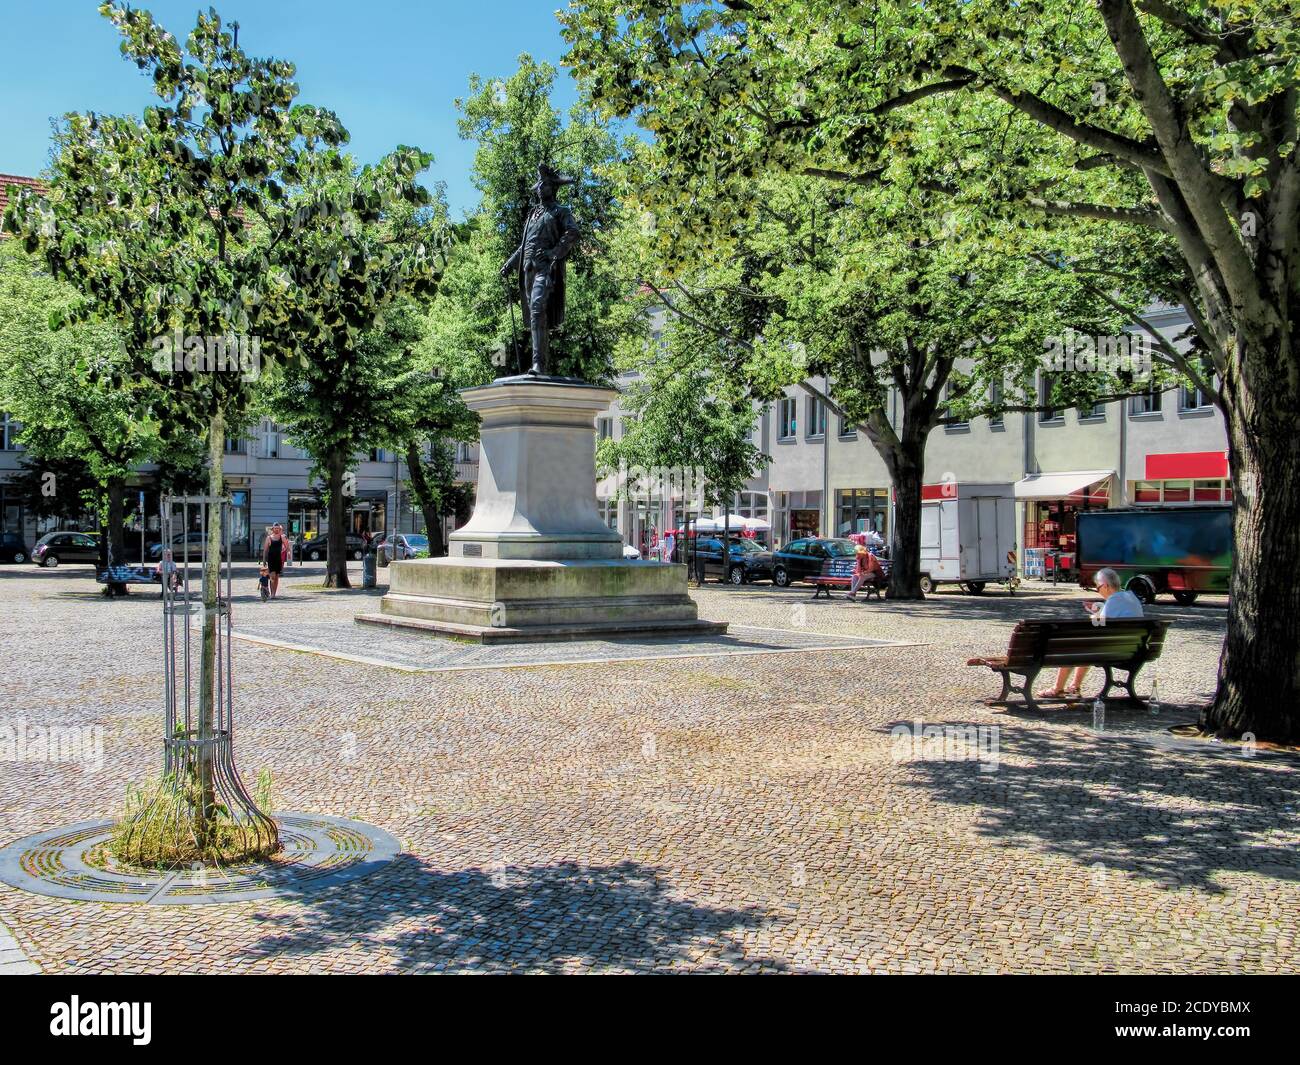 Berlin, Germany - market square with Frederick the Great monument in Friedrichshagen Stock Photo